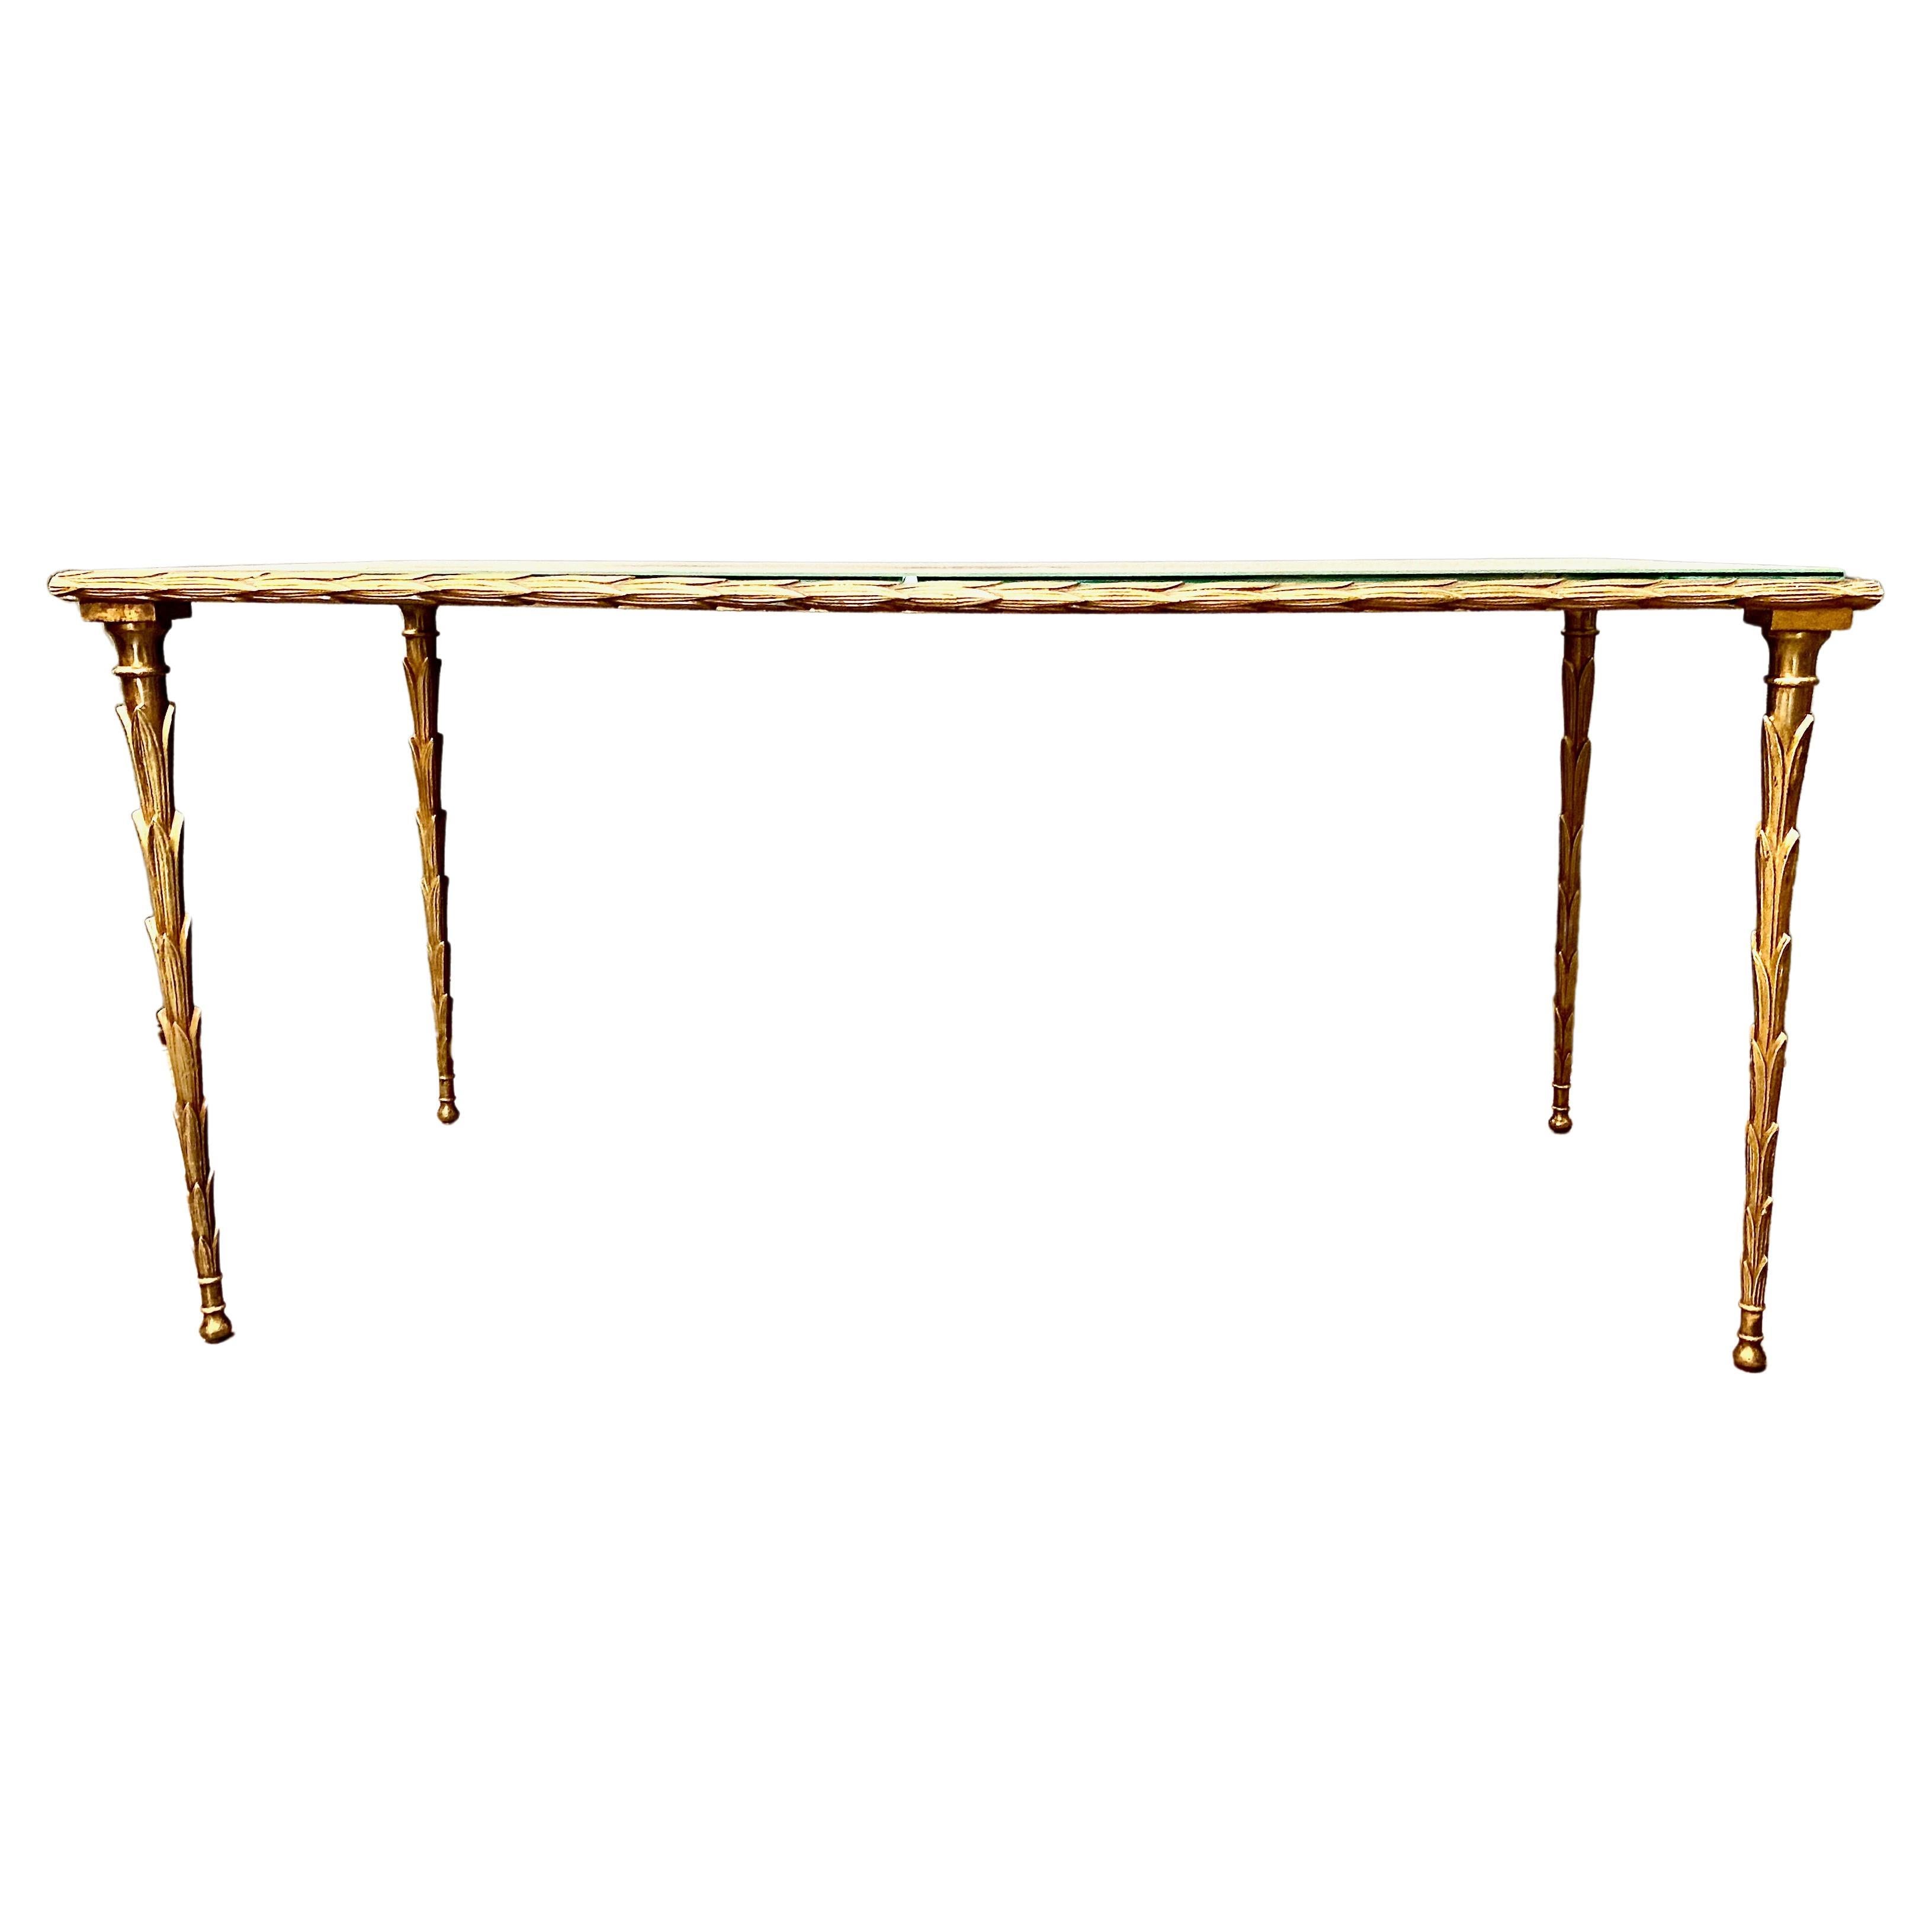 This is a superb example of a Maison Bagues coffee or cocktail table that dates to c. 1960-1969. The gilt bronze frame is cast in a palm tree form. The extending of the palm tree element to include the top surround is an additional indication of